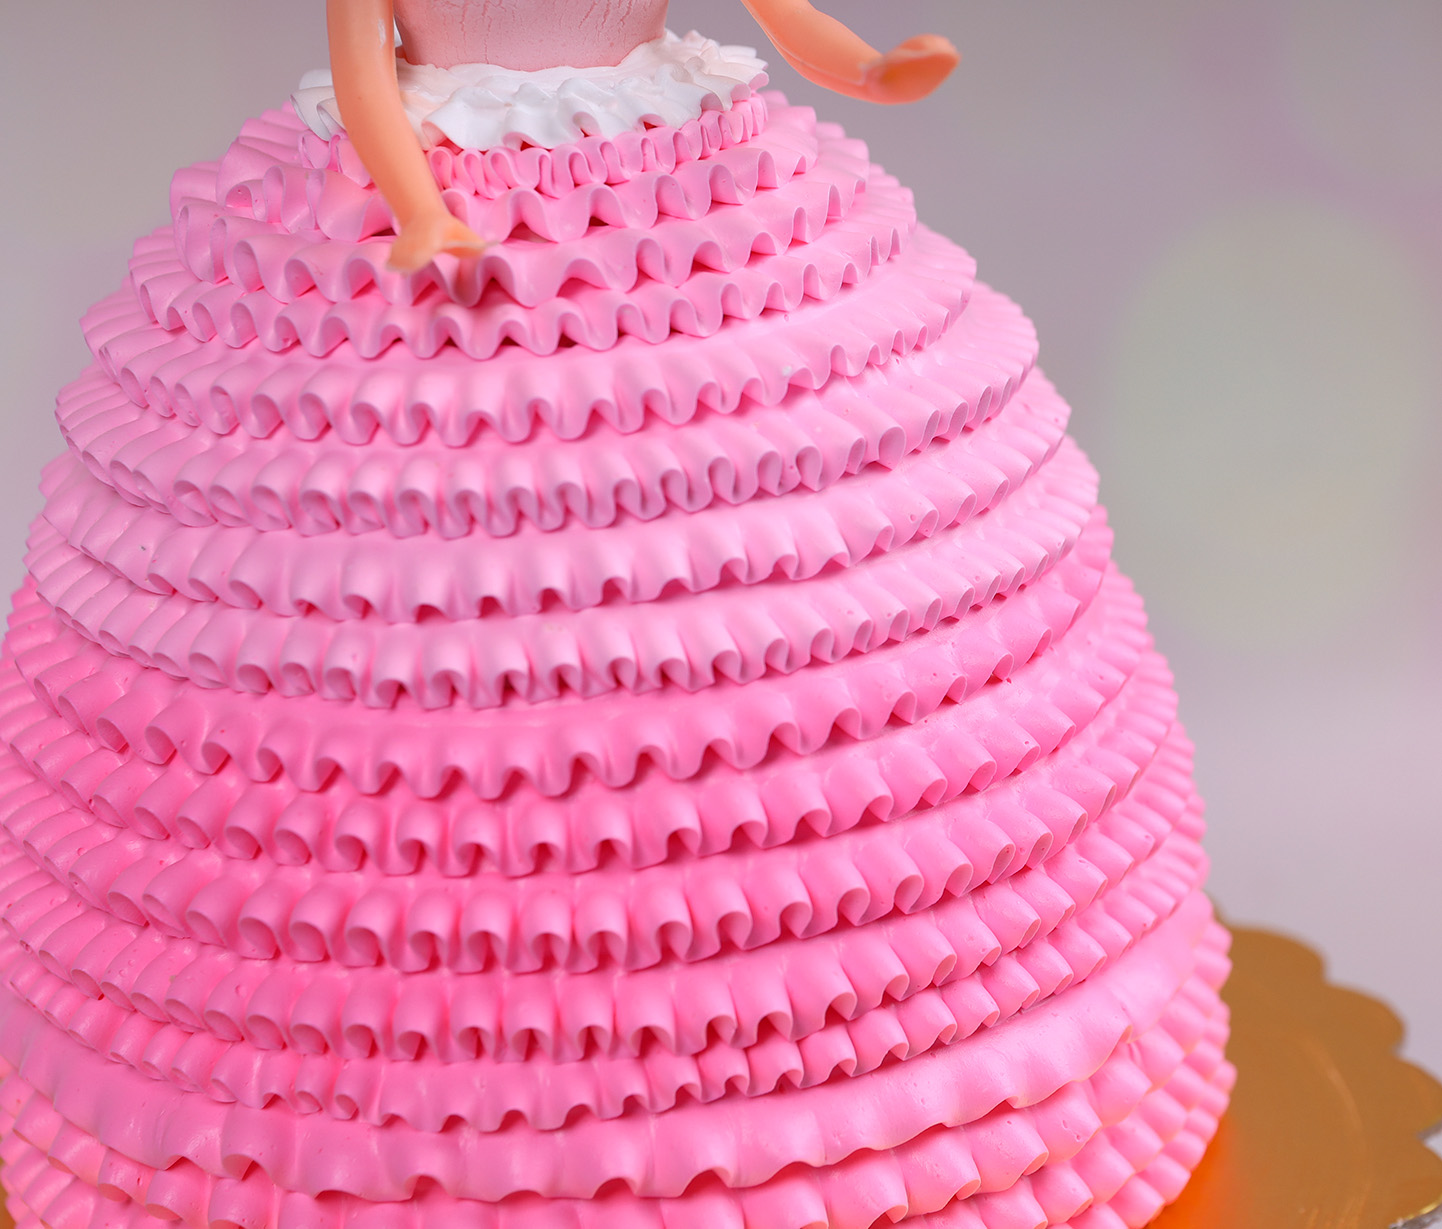 19 Barbie Cake Ideas Perfect for Any Party - Let's Eat Cake